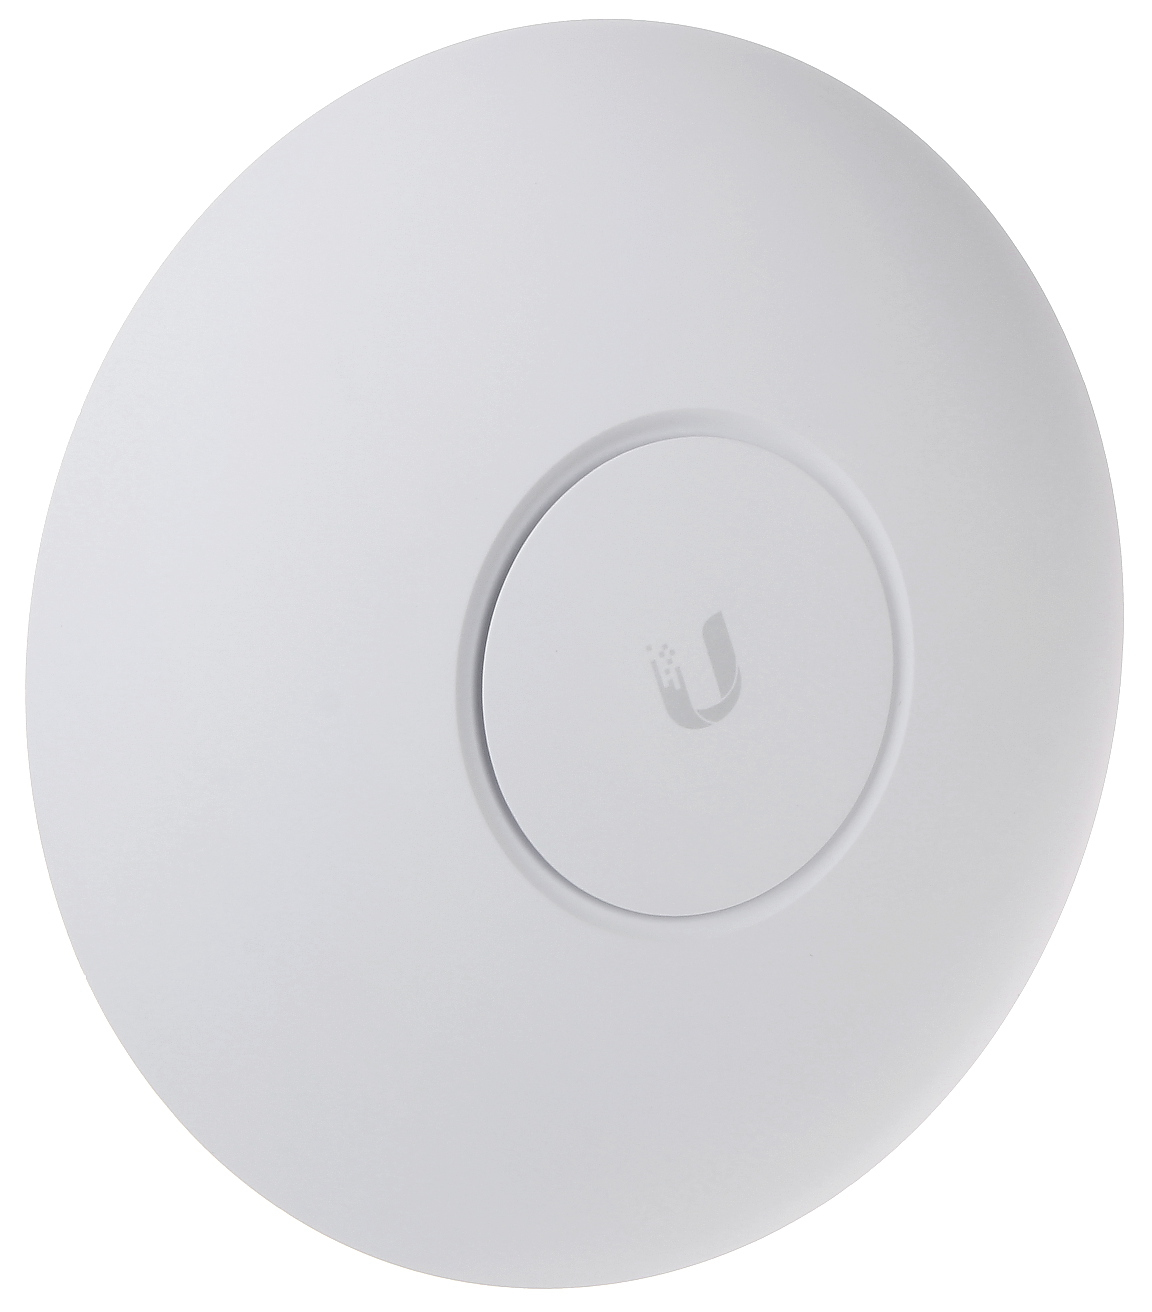 ACCESS POINT UBIQUITI 450/1300MBPS IN/OUT 3ANT 3DBI+POE INJECTOR